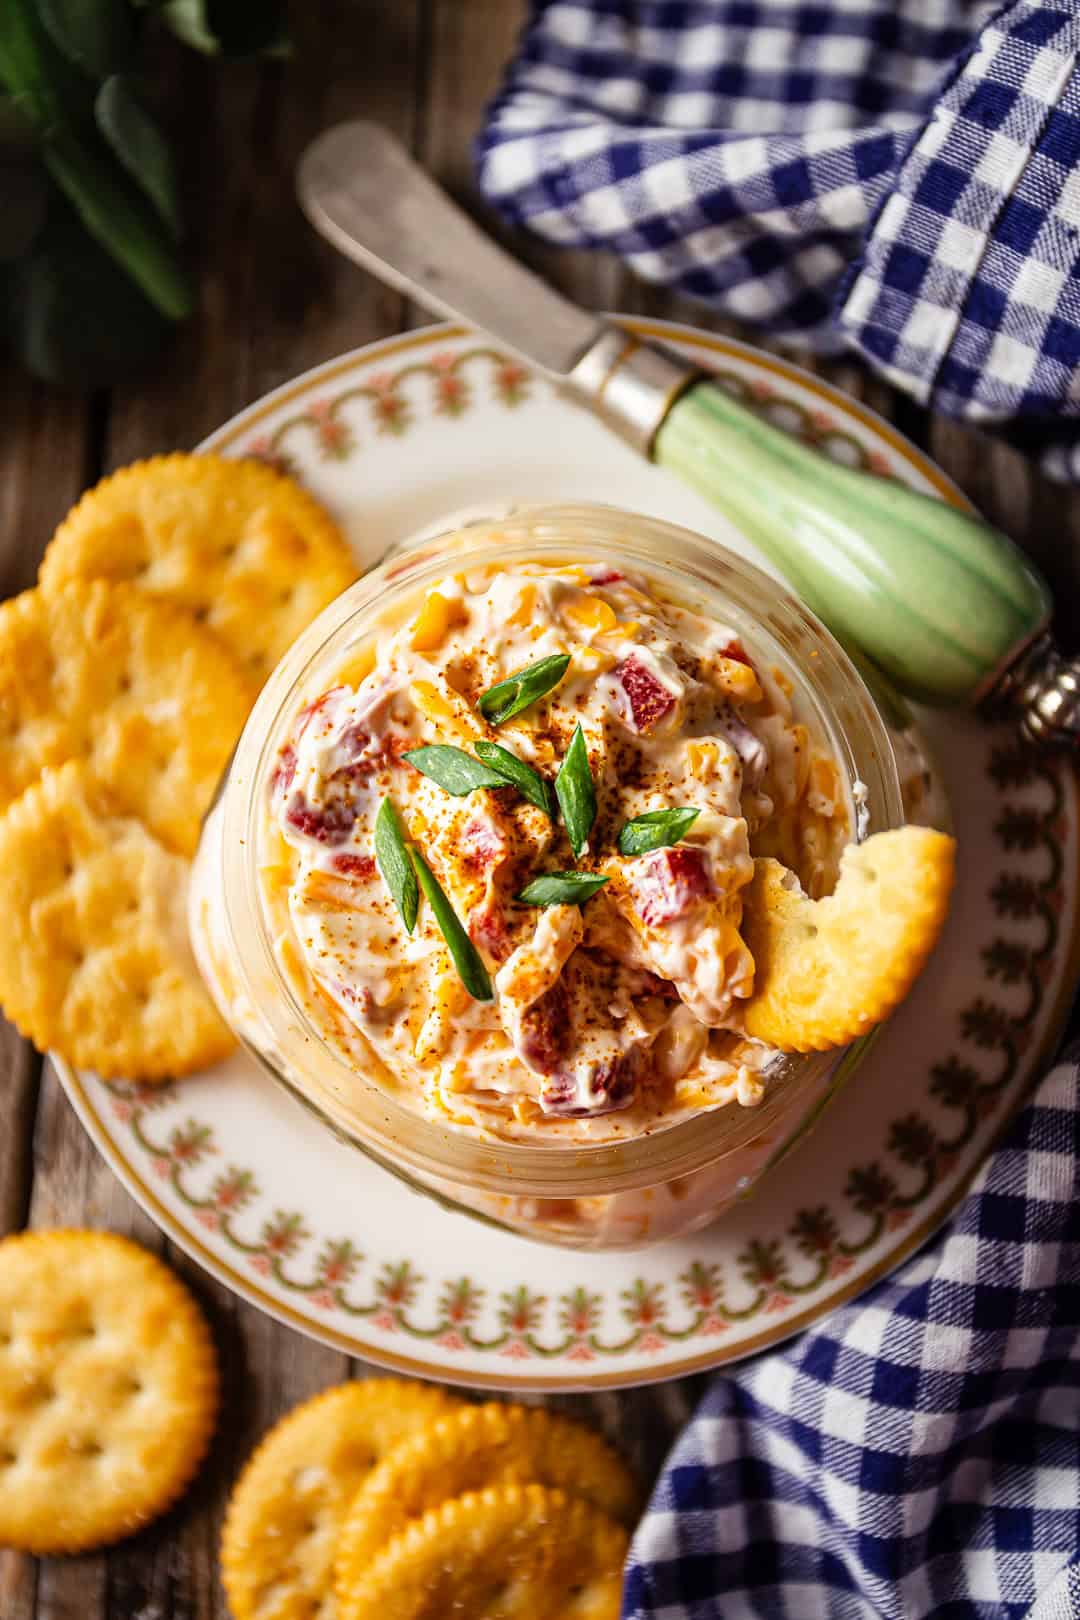 Homemade pimento cheese garnished with cayenne and scallions.